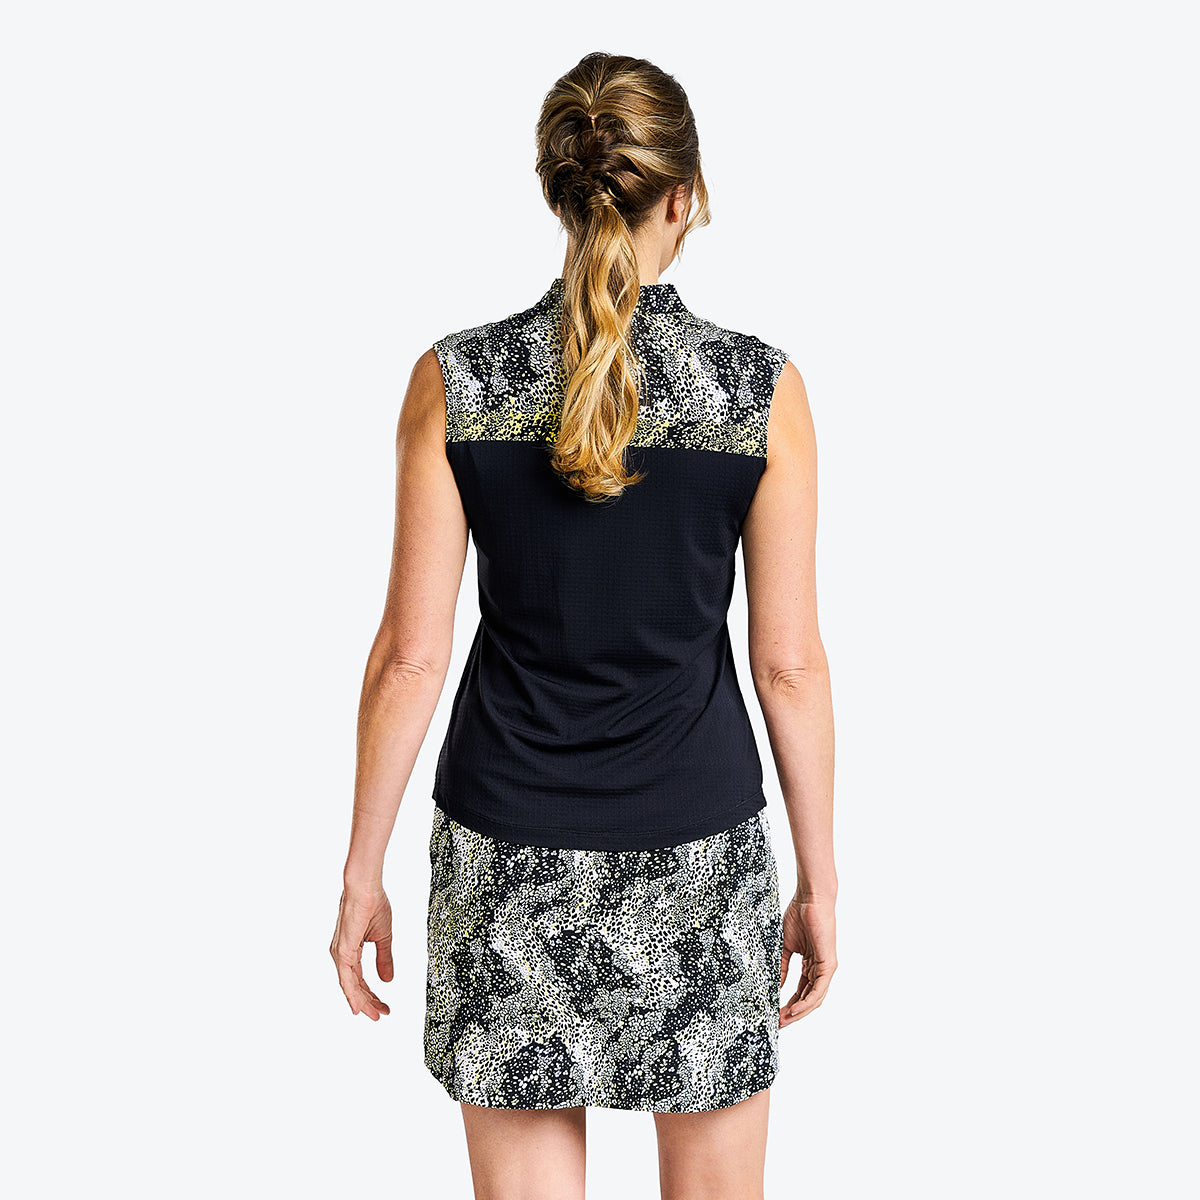 Nivo Ladies Sleeveless Polo With Speckled Print in Black